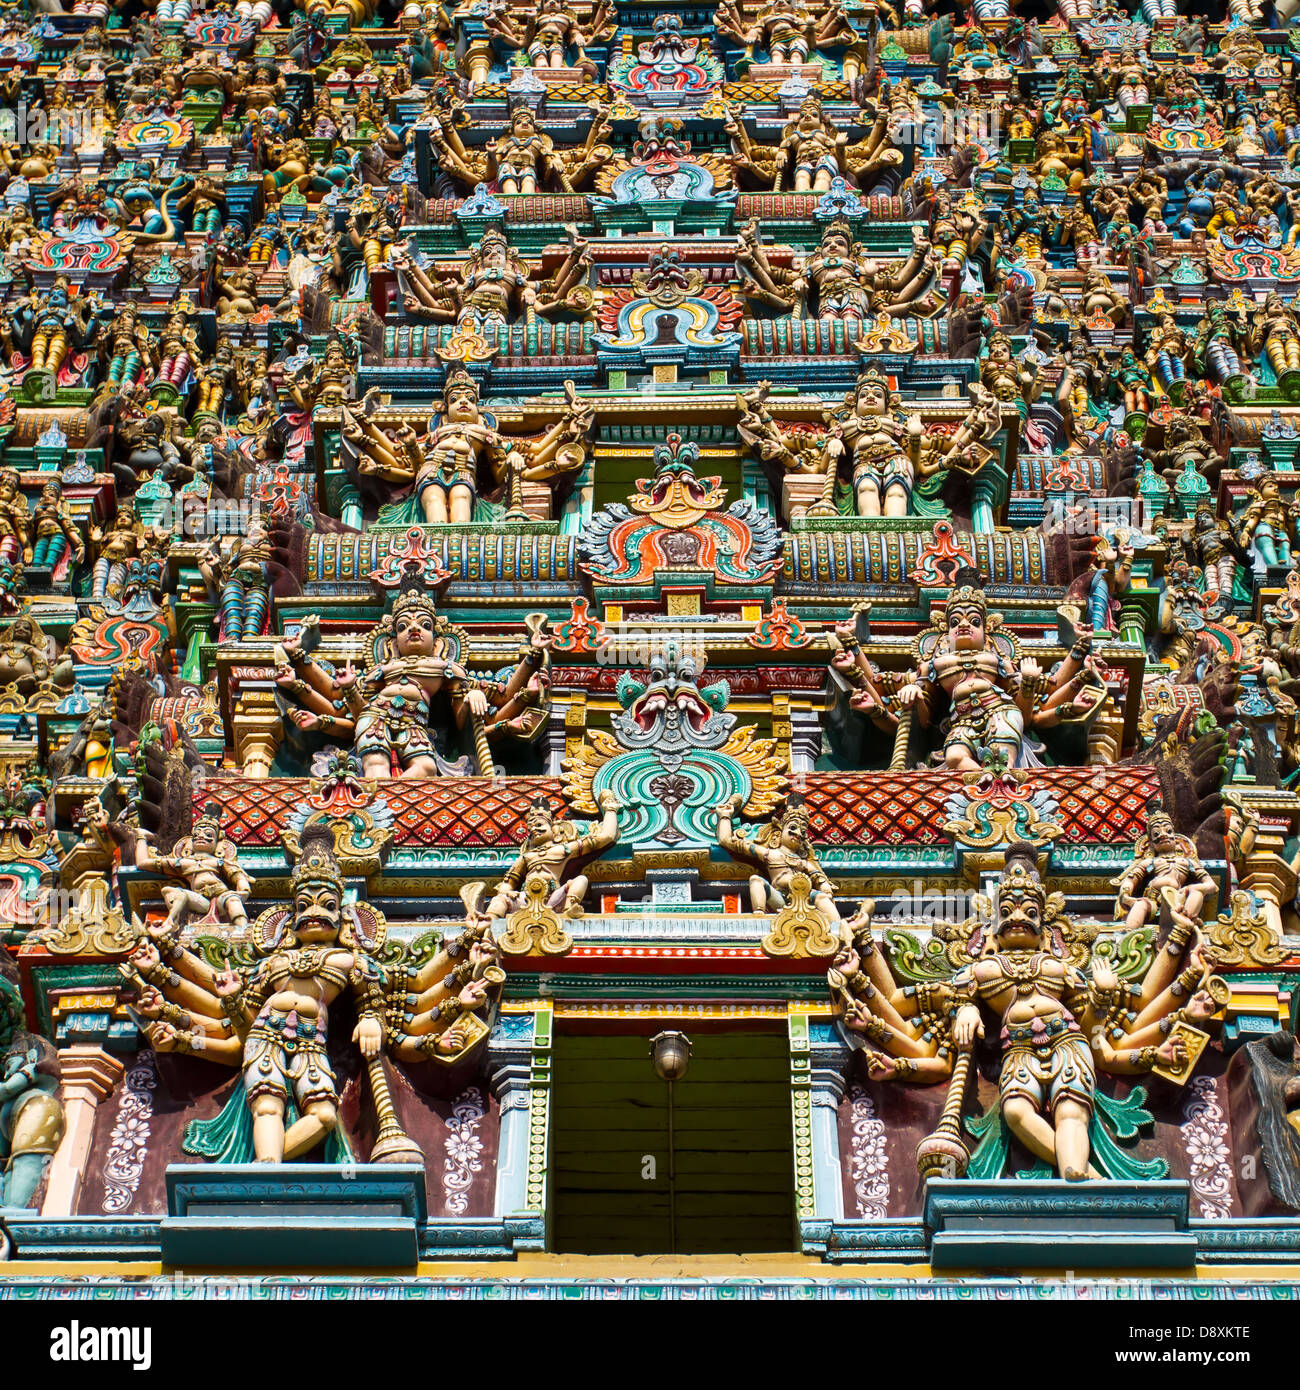 Meenakshi temple - one of the biggest and oldest Indian temples in Madurai, Tamil Nadu, India Stock Photo